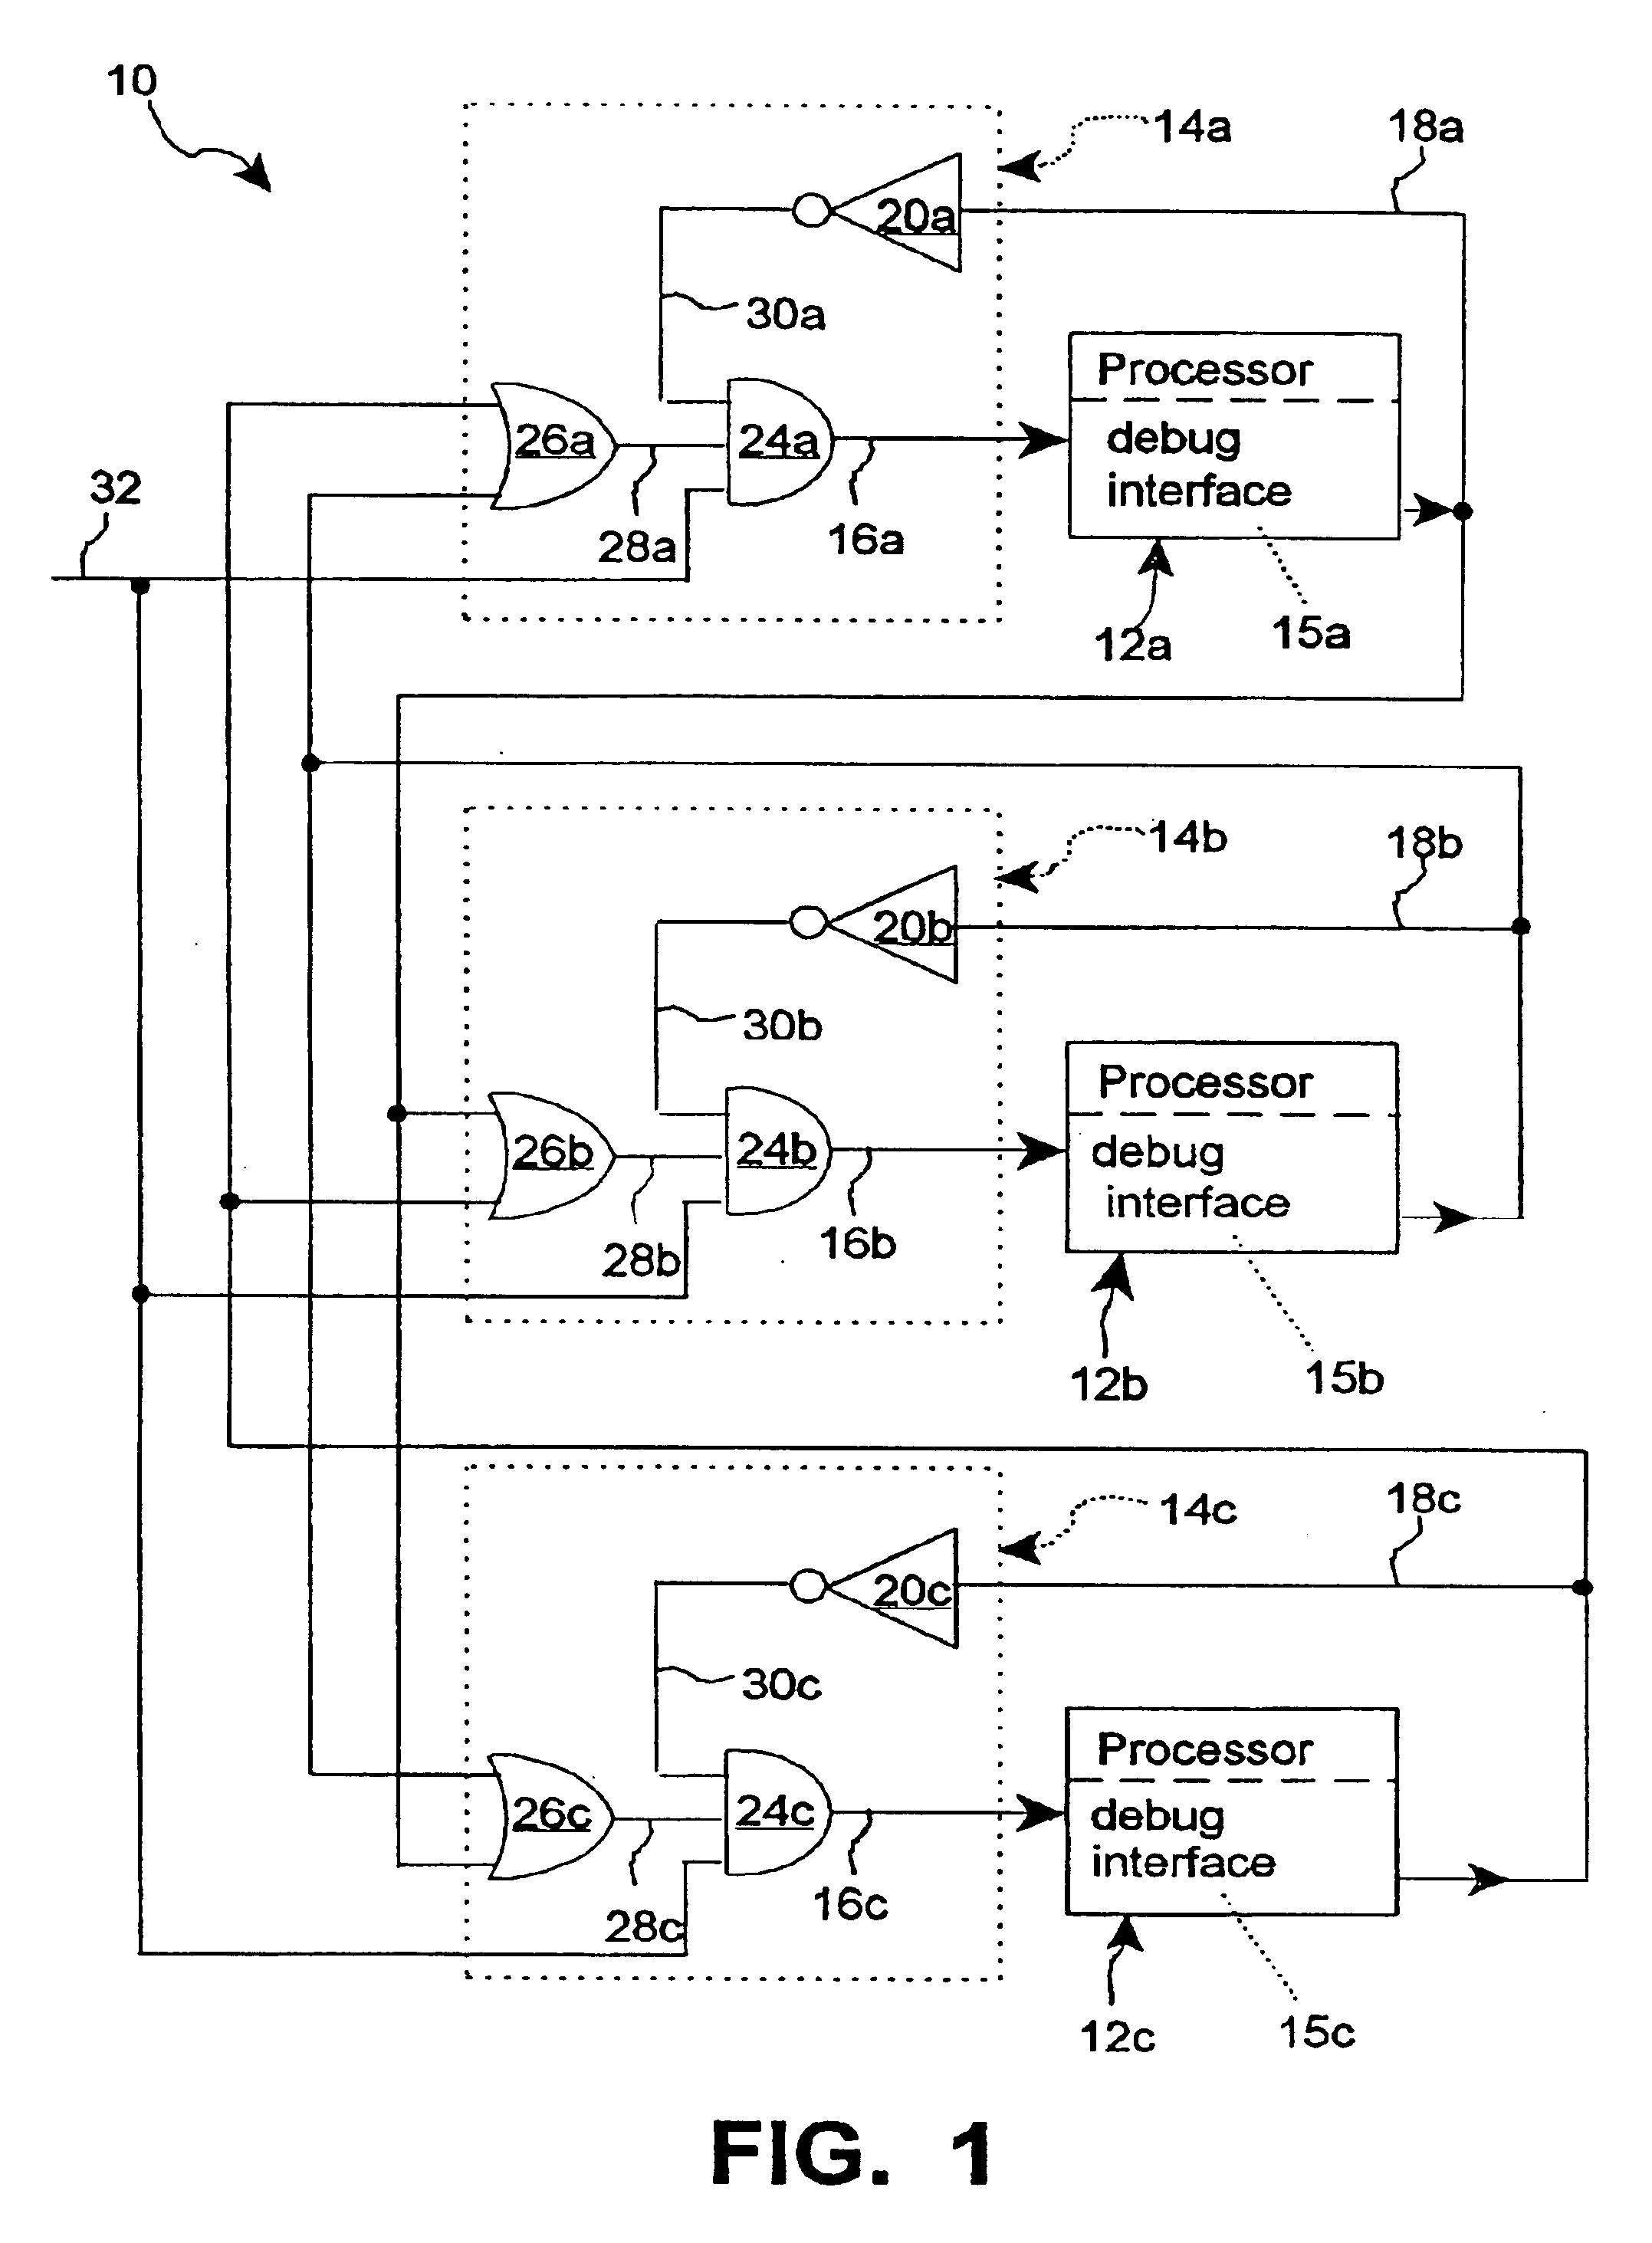 Multiprocessor system and method for simultaneously placing all processors into debug mode